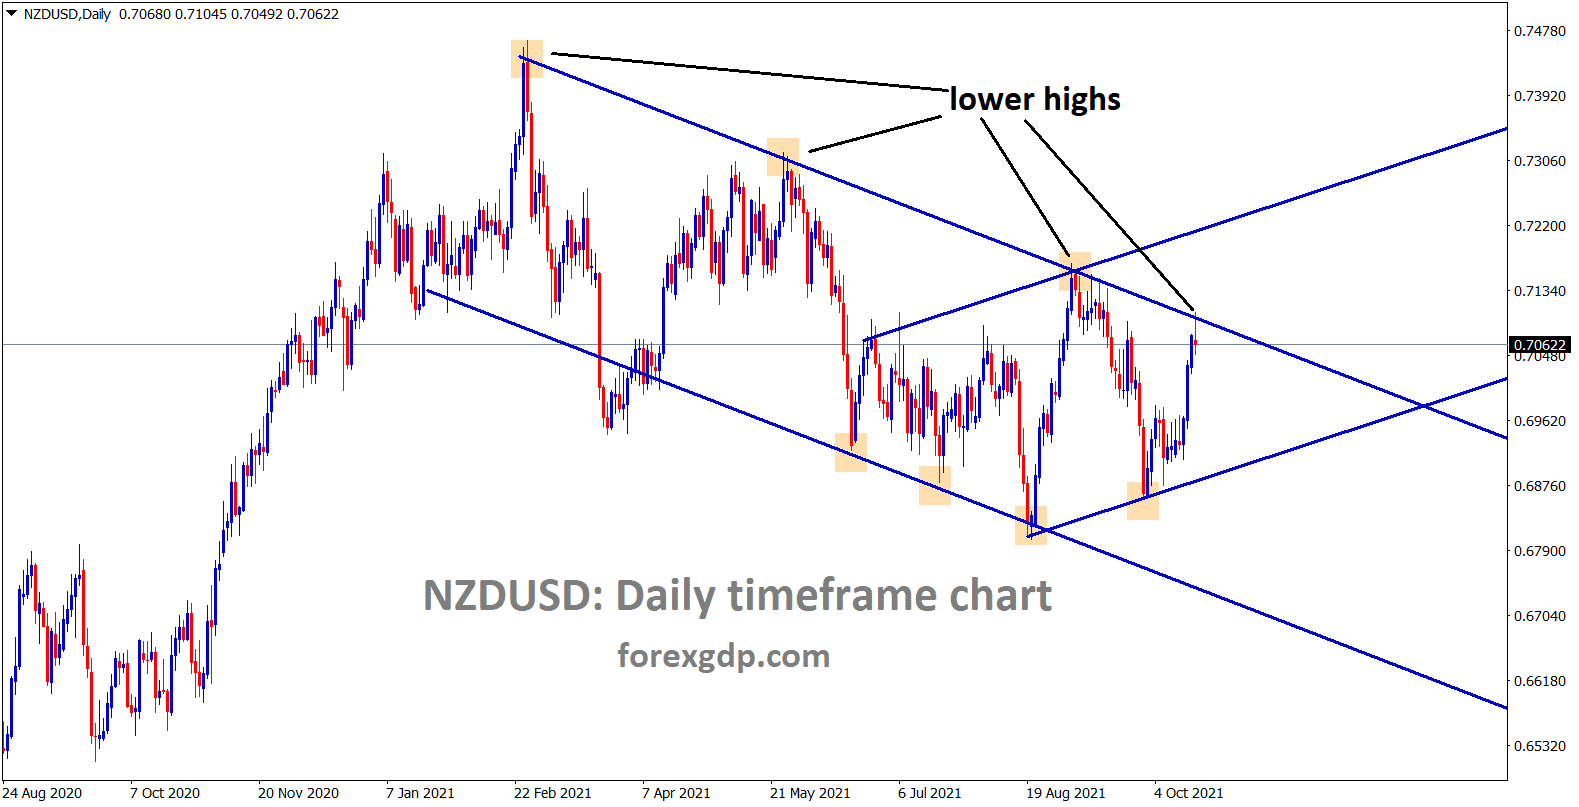 NZDUSD hits the lower high area of the downtrend line again wait for the reversal or breakout